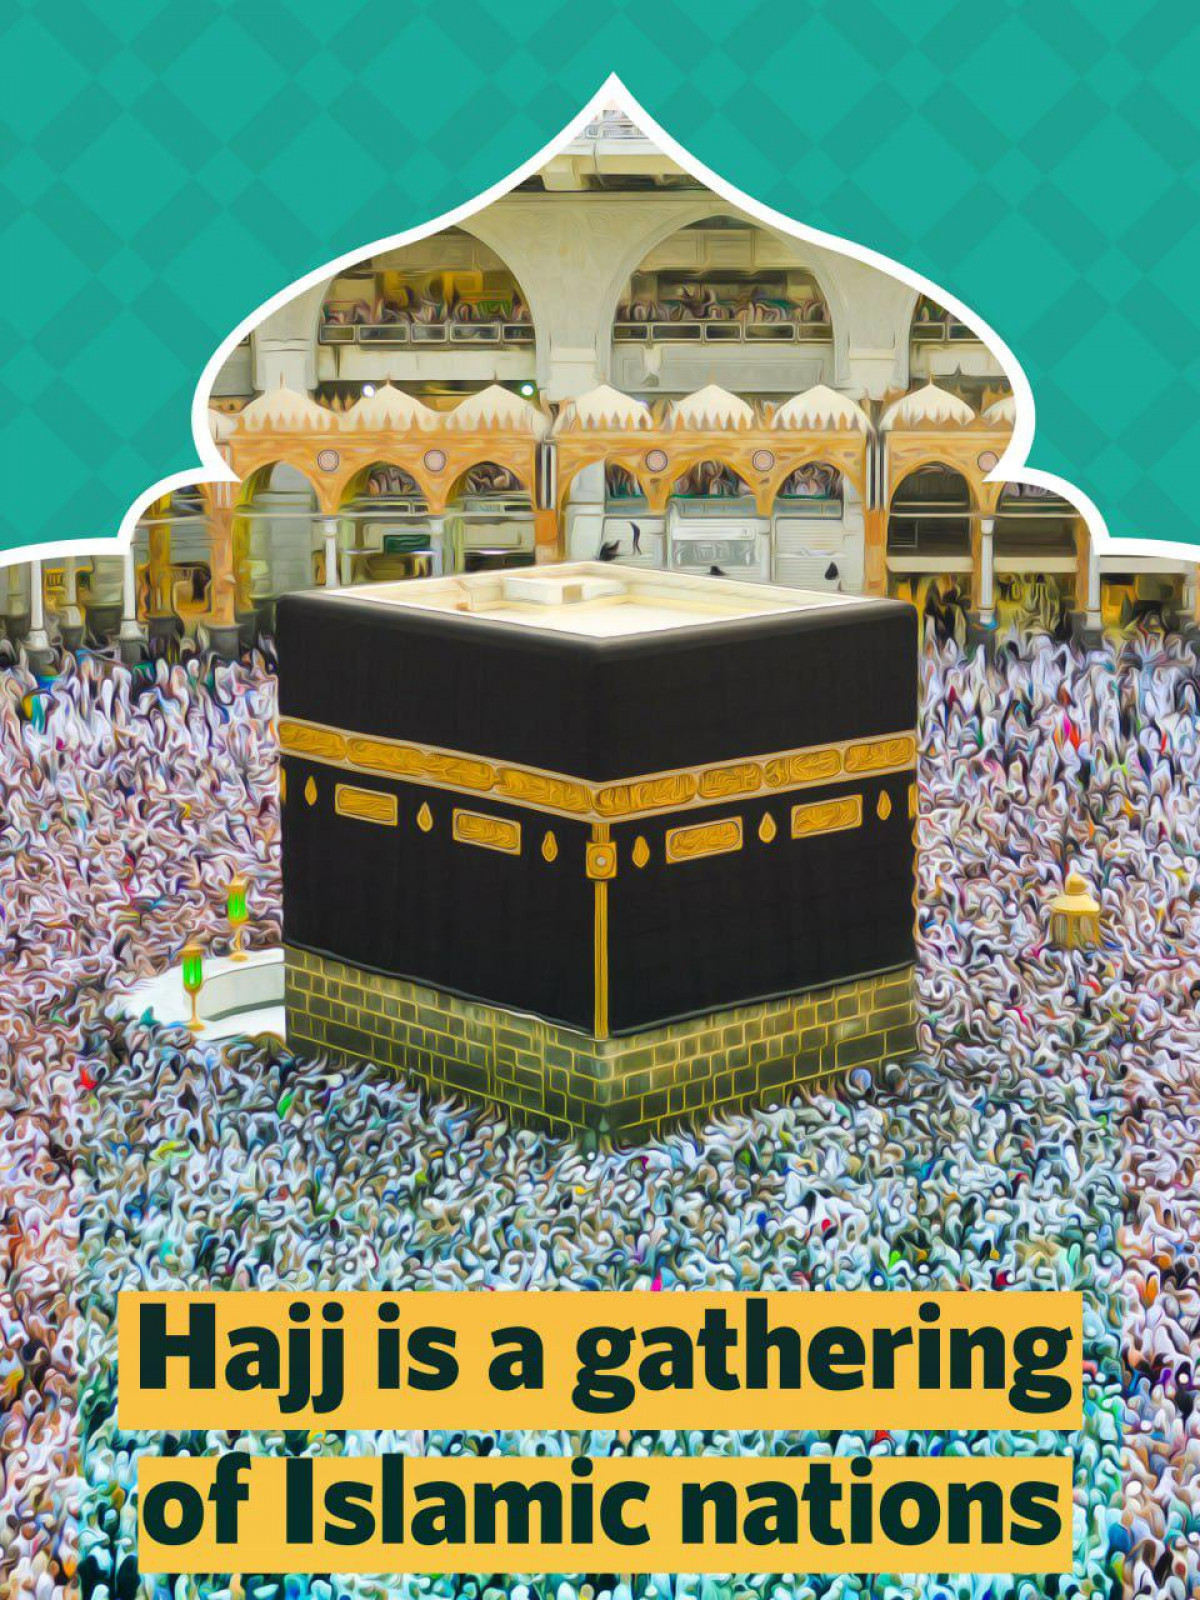 Hajj is a gathering of Islamic nations